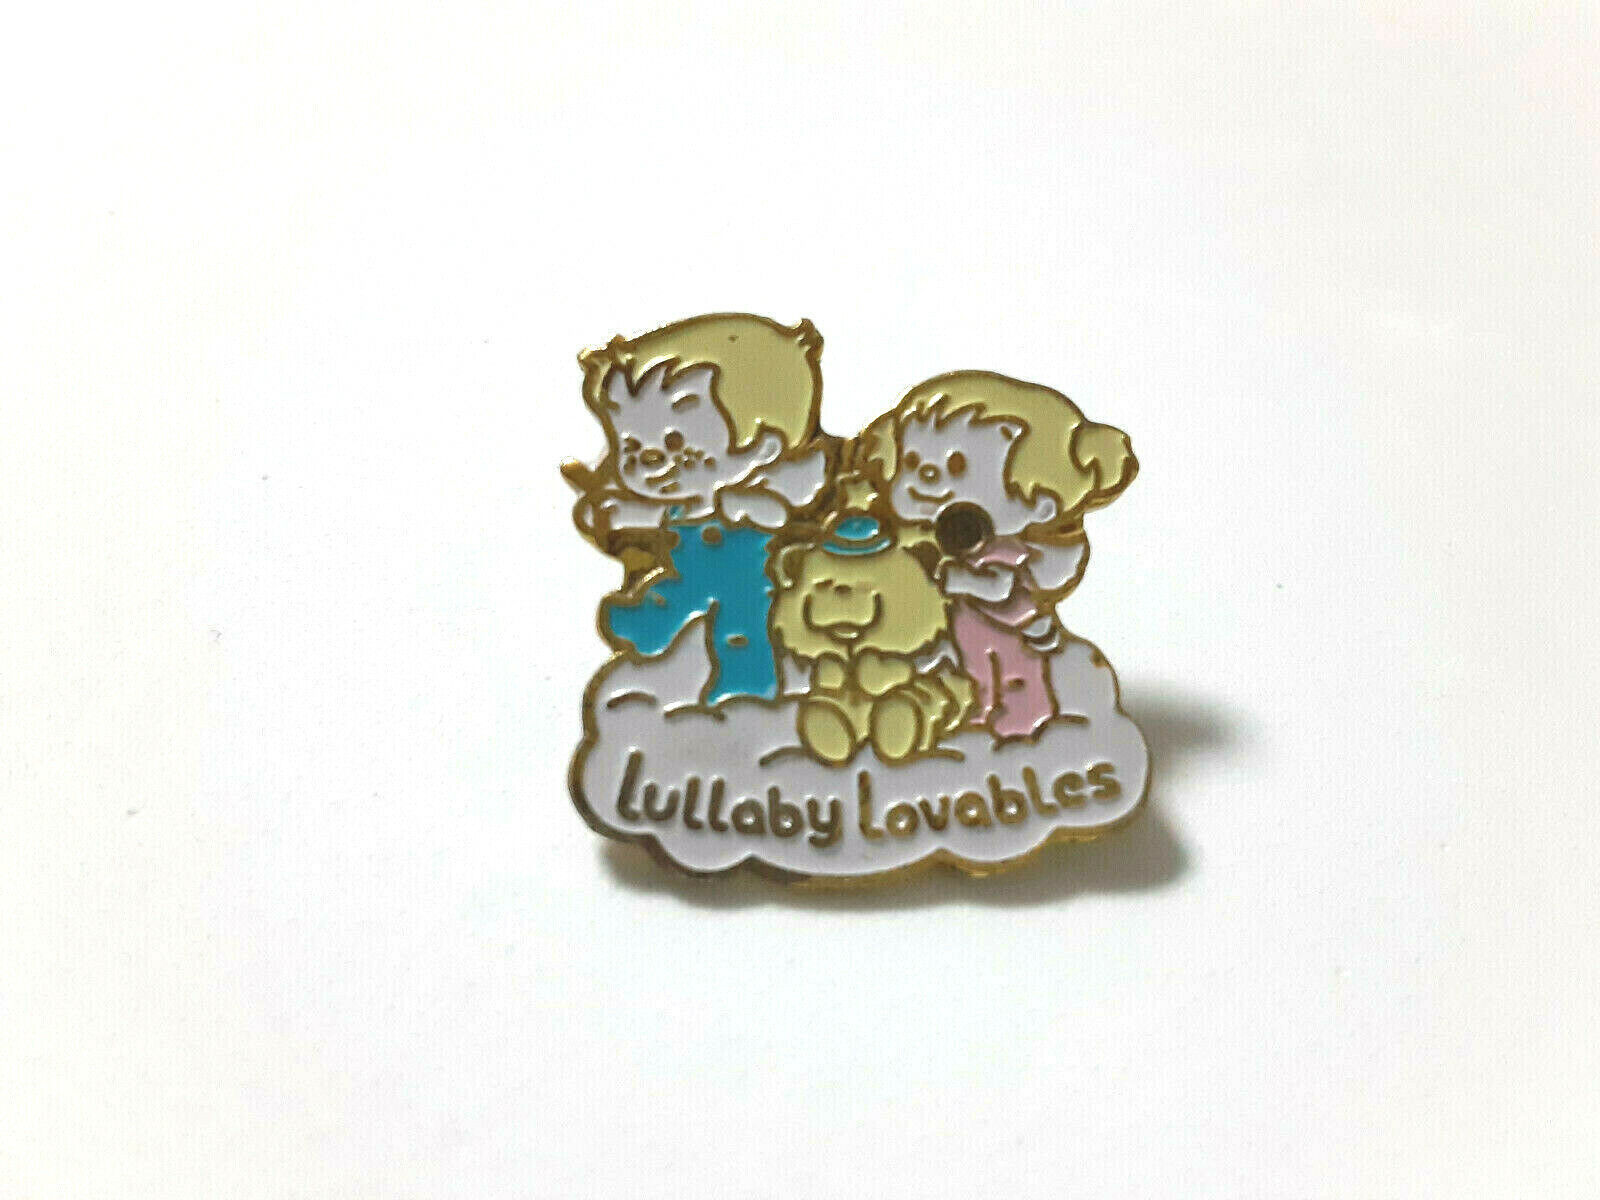 Lullaby Lovables Pin Badge 2002 Super Rare Old SANRIO Character - $31.44